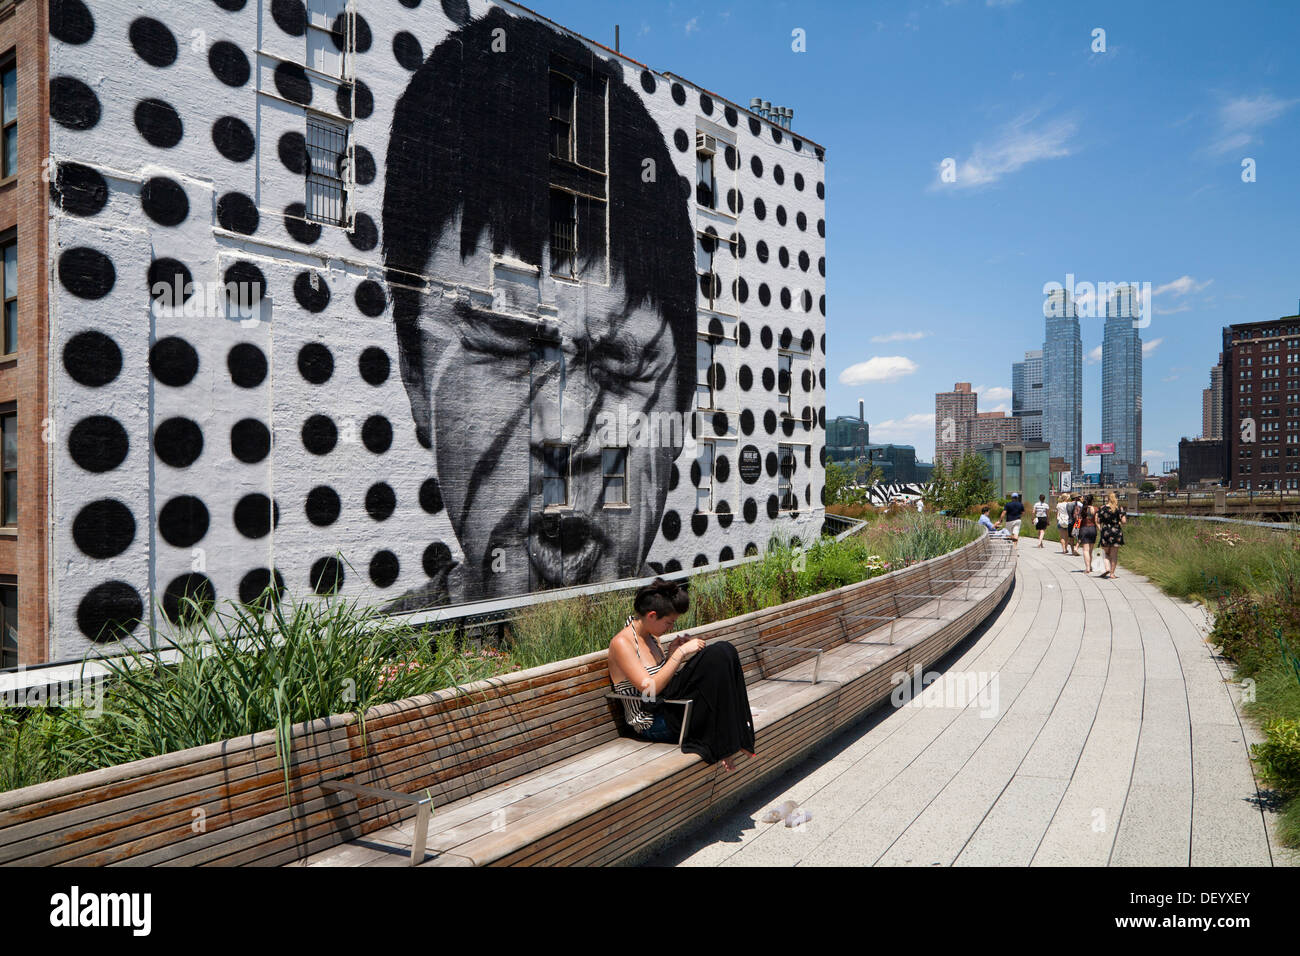 Street art by JR at High Line Park, Lower West Side, Meatpacking District, Chelsea, Greenwich Village, Manhattan, New York City Stock Photo